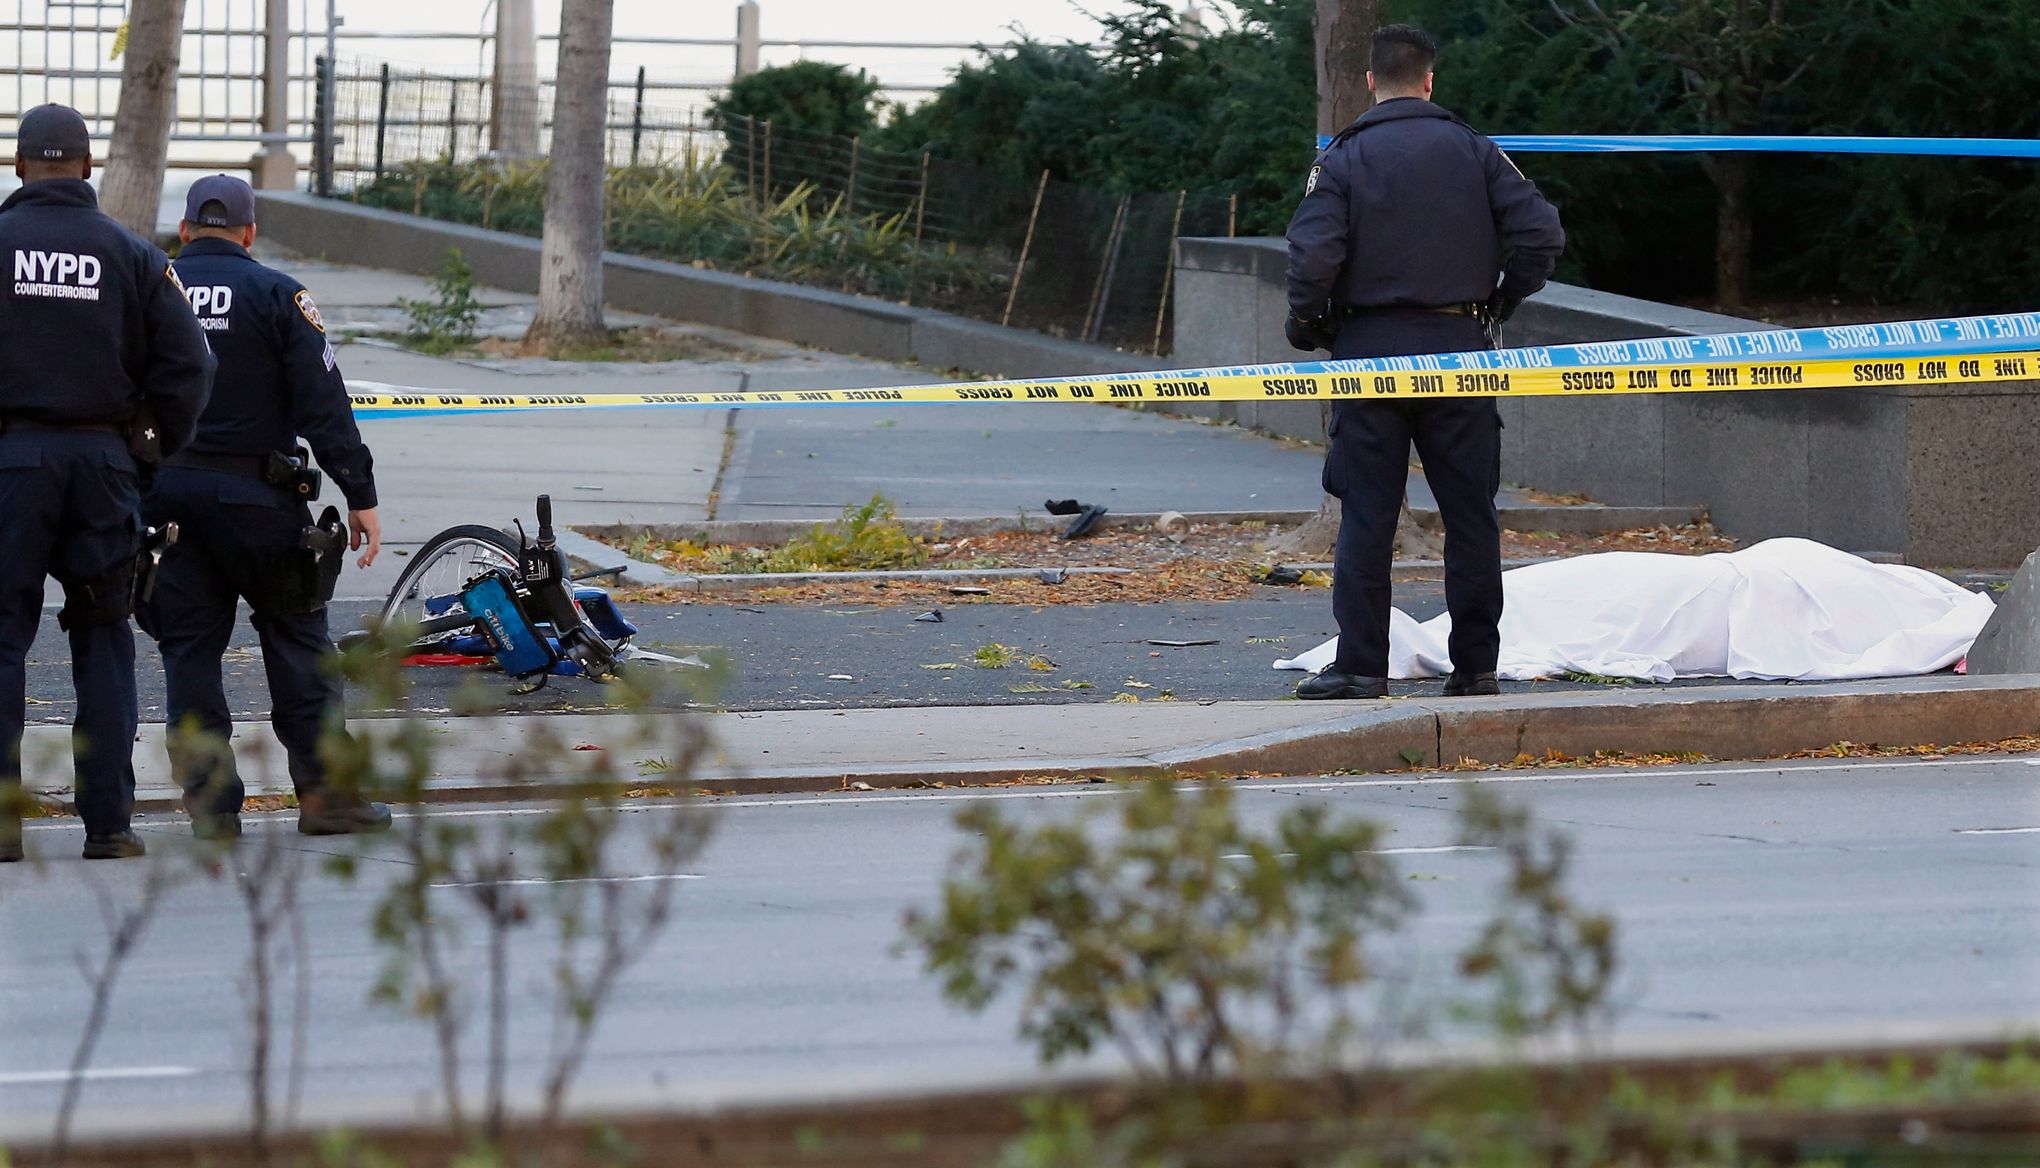 Lawyers Bike path attack defendant willing to plead guilty The